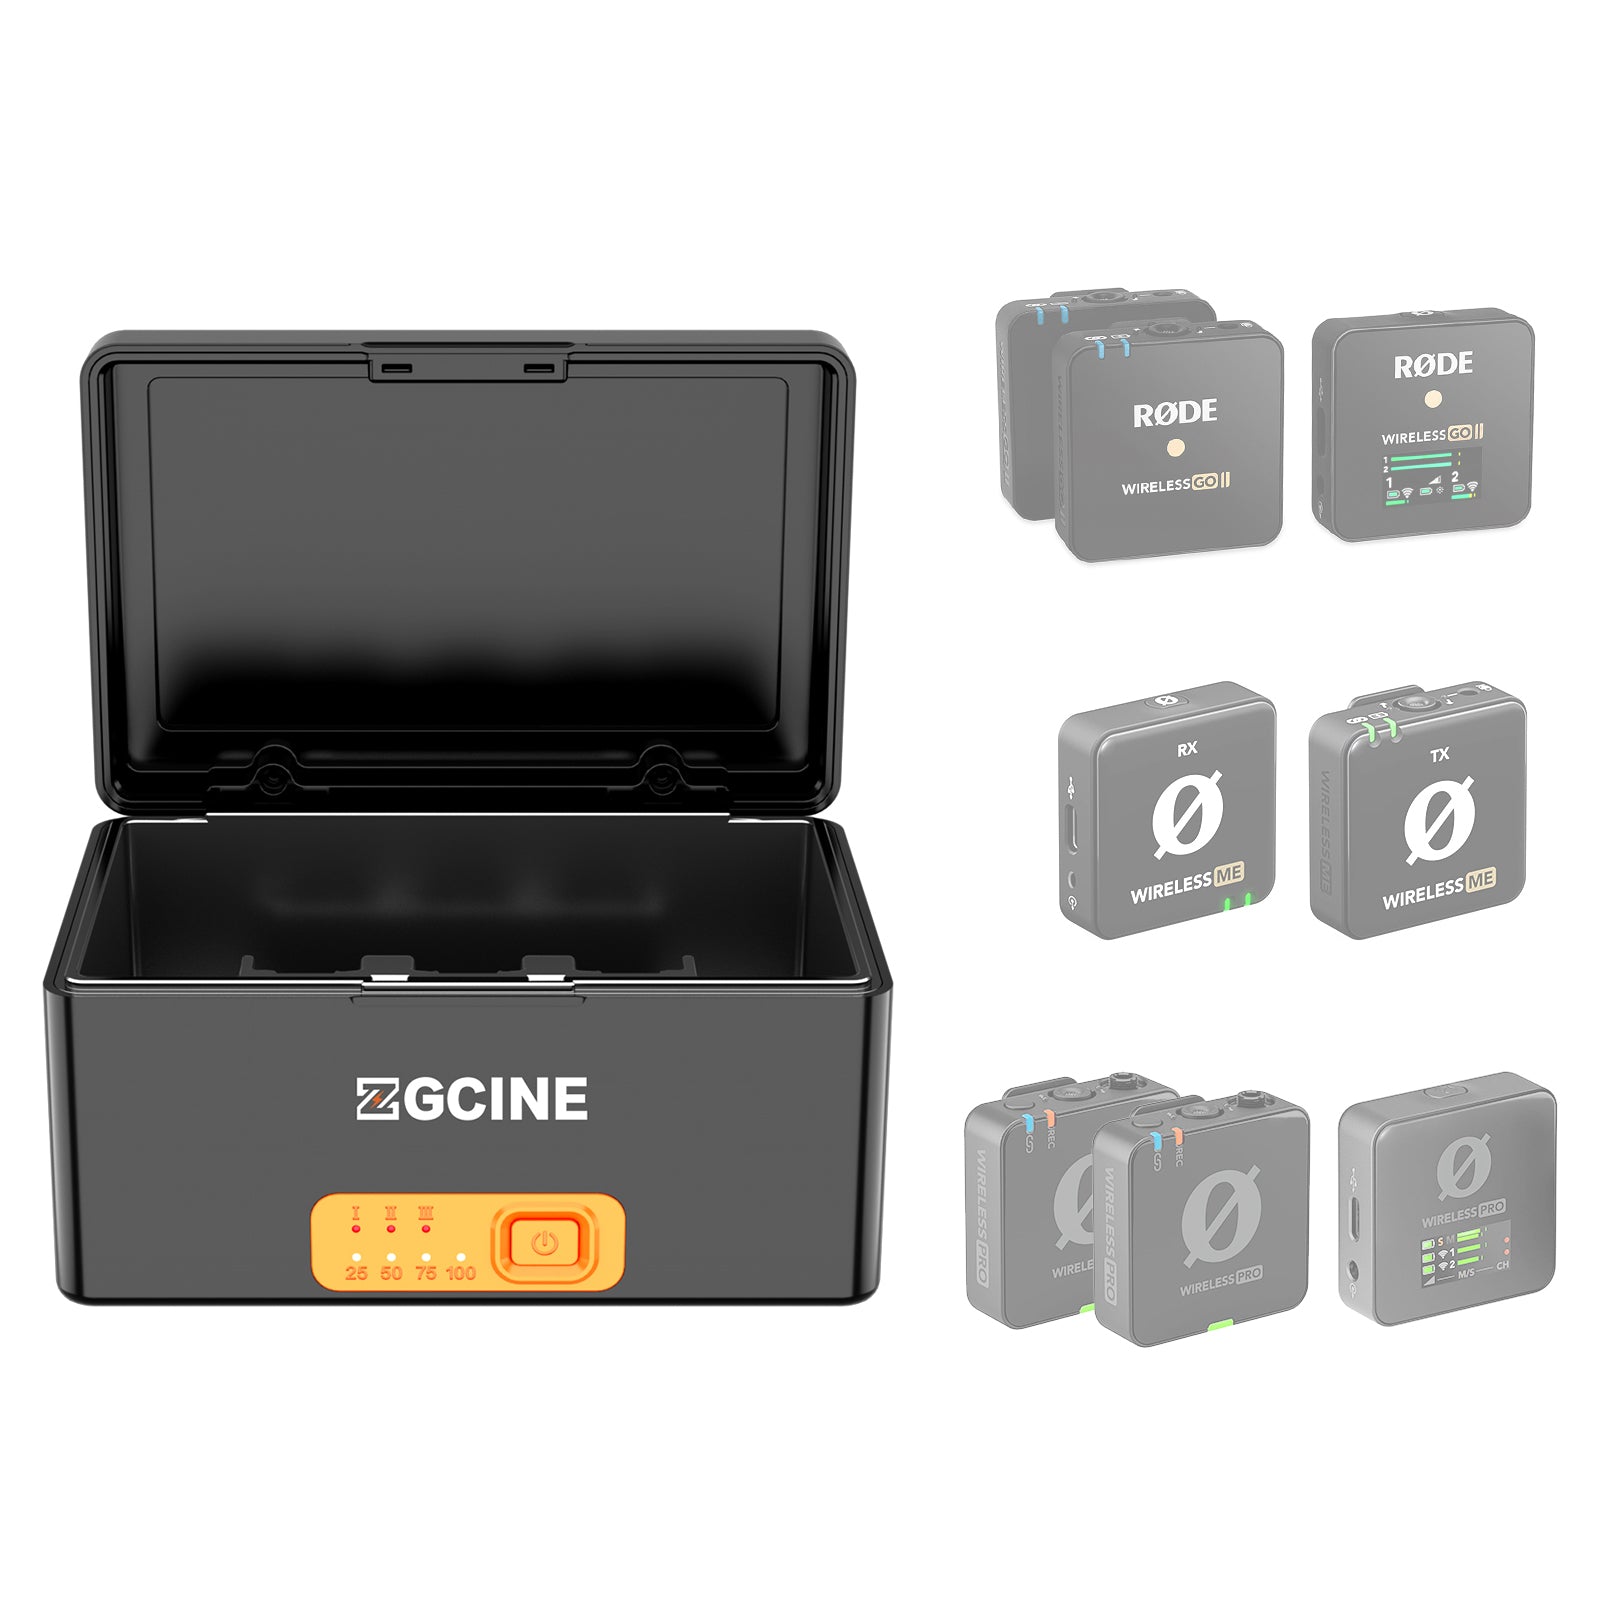 ZGCINE ZG-R30Pro Charging Case for Rode Microphones Wireless GO / Wire